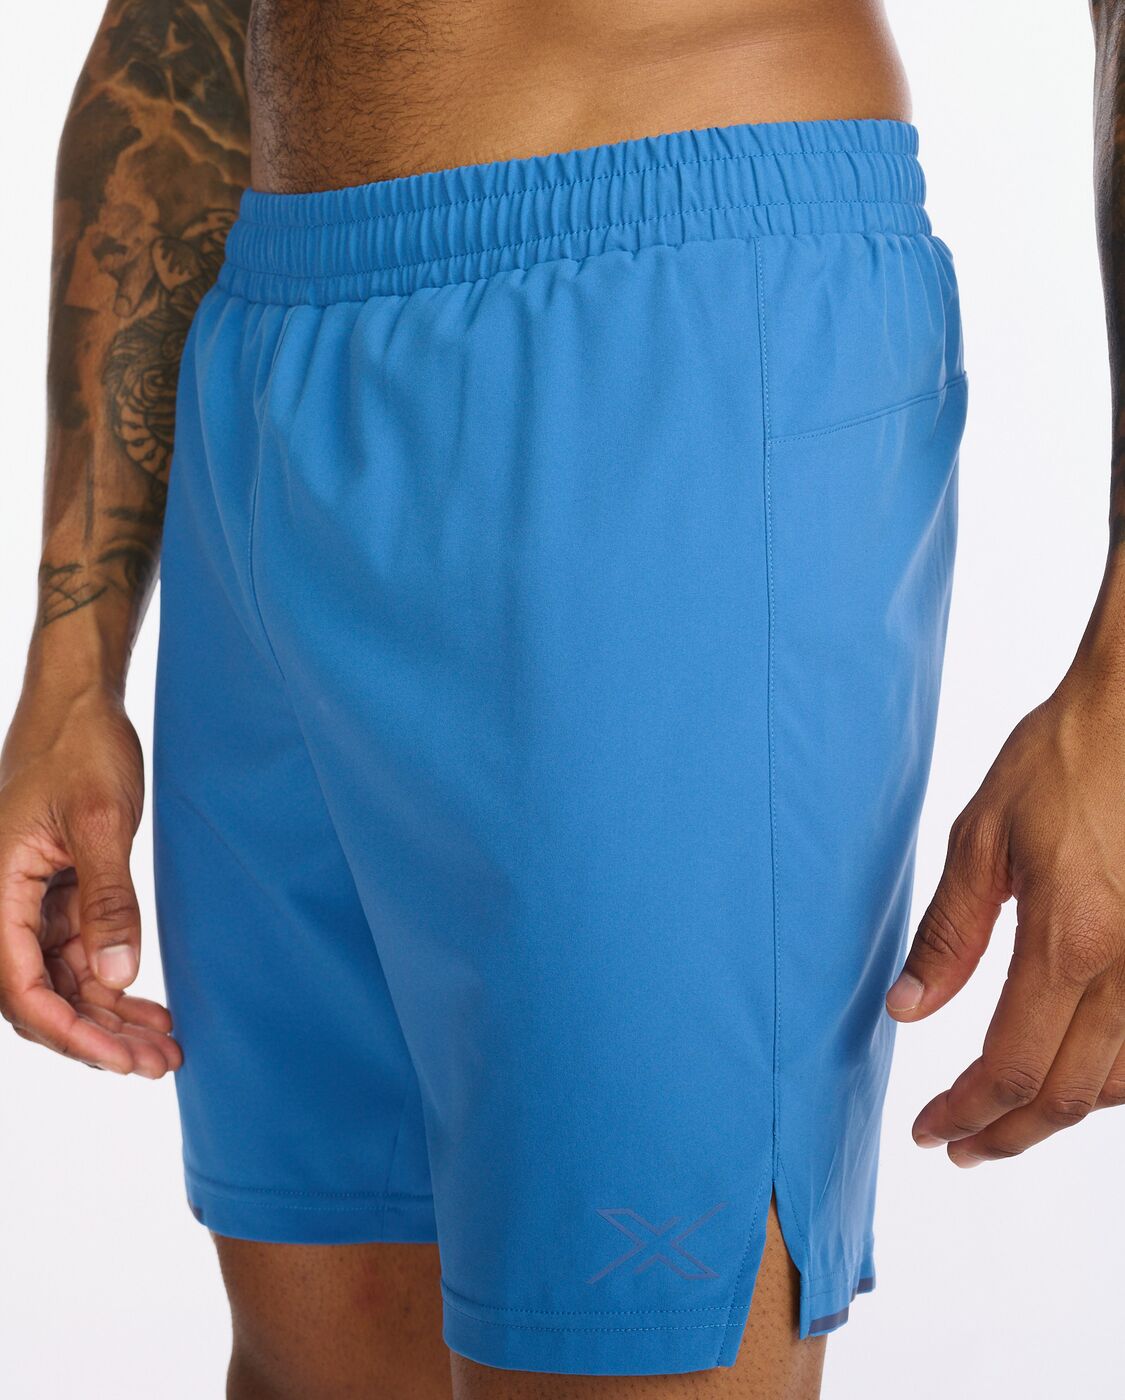 2XU South Africa - Men's Aero 7 inch Shorts - Starling/Medieval Blue Reflect